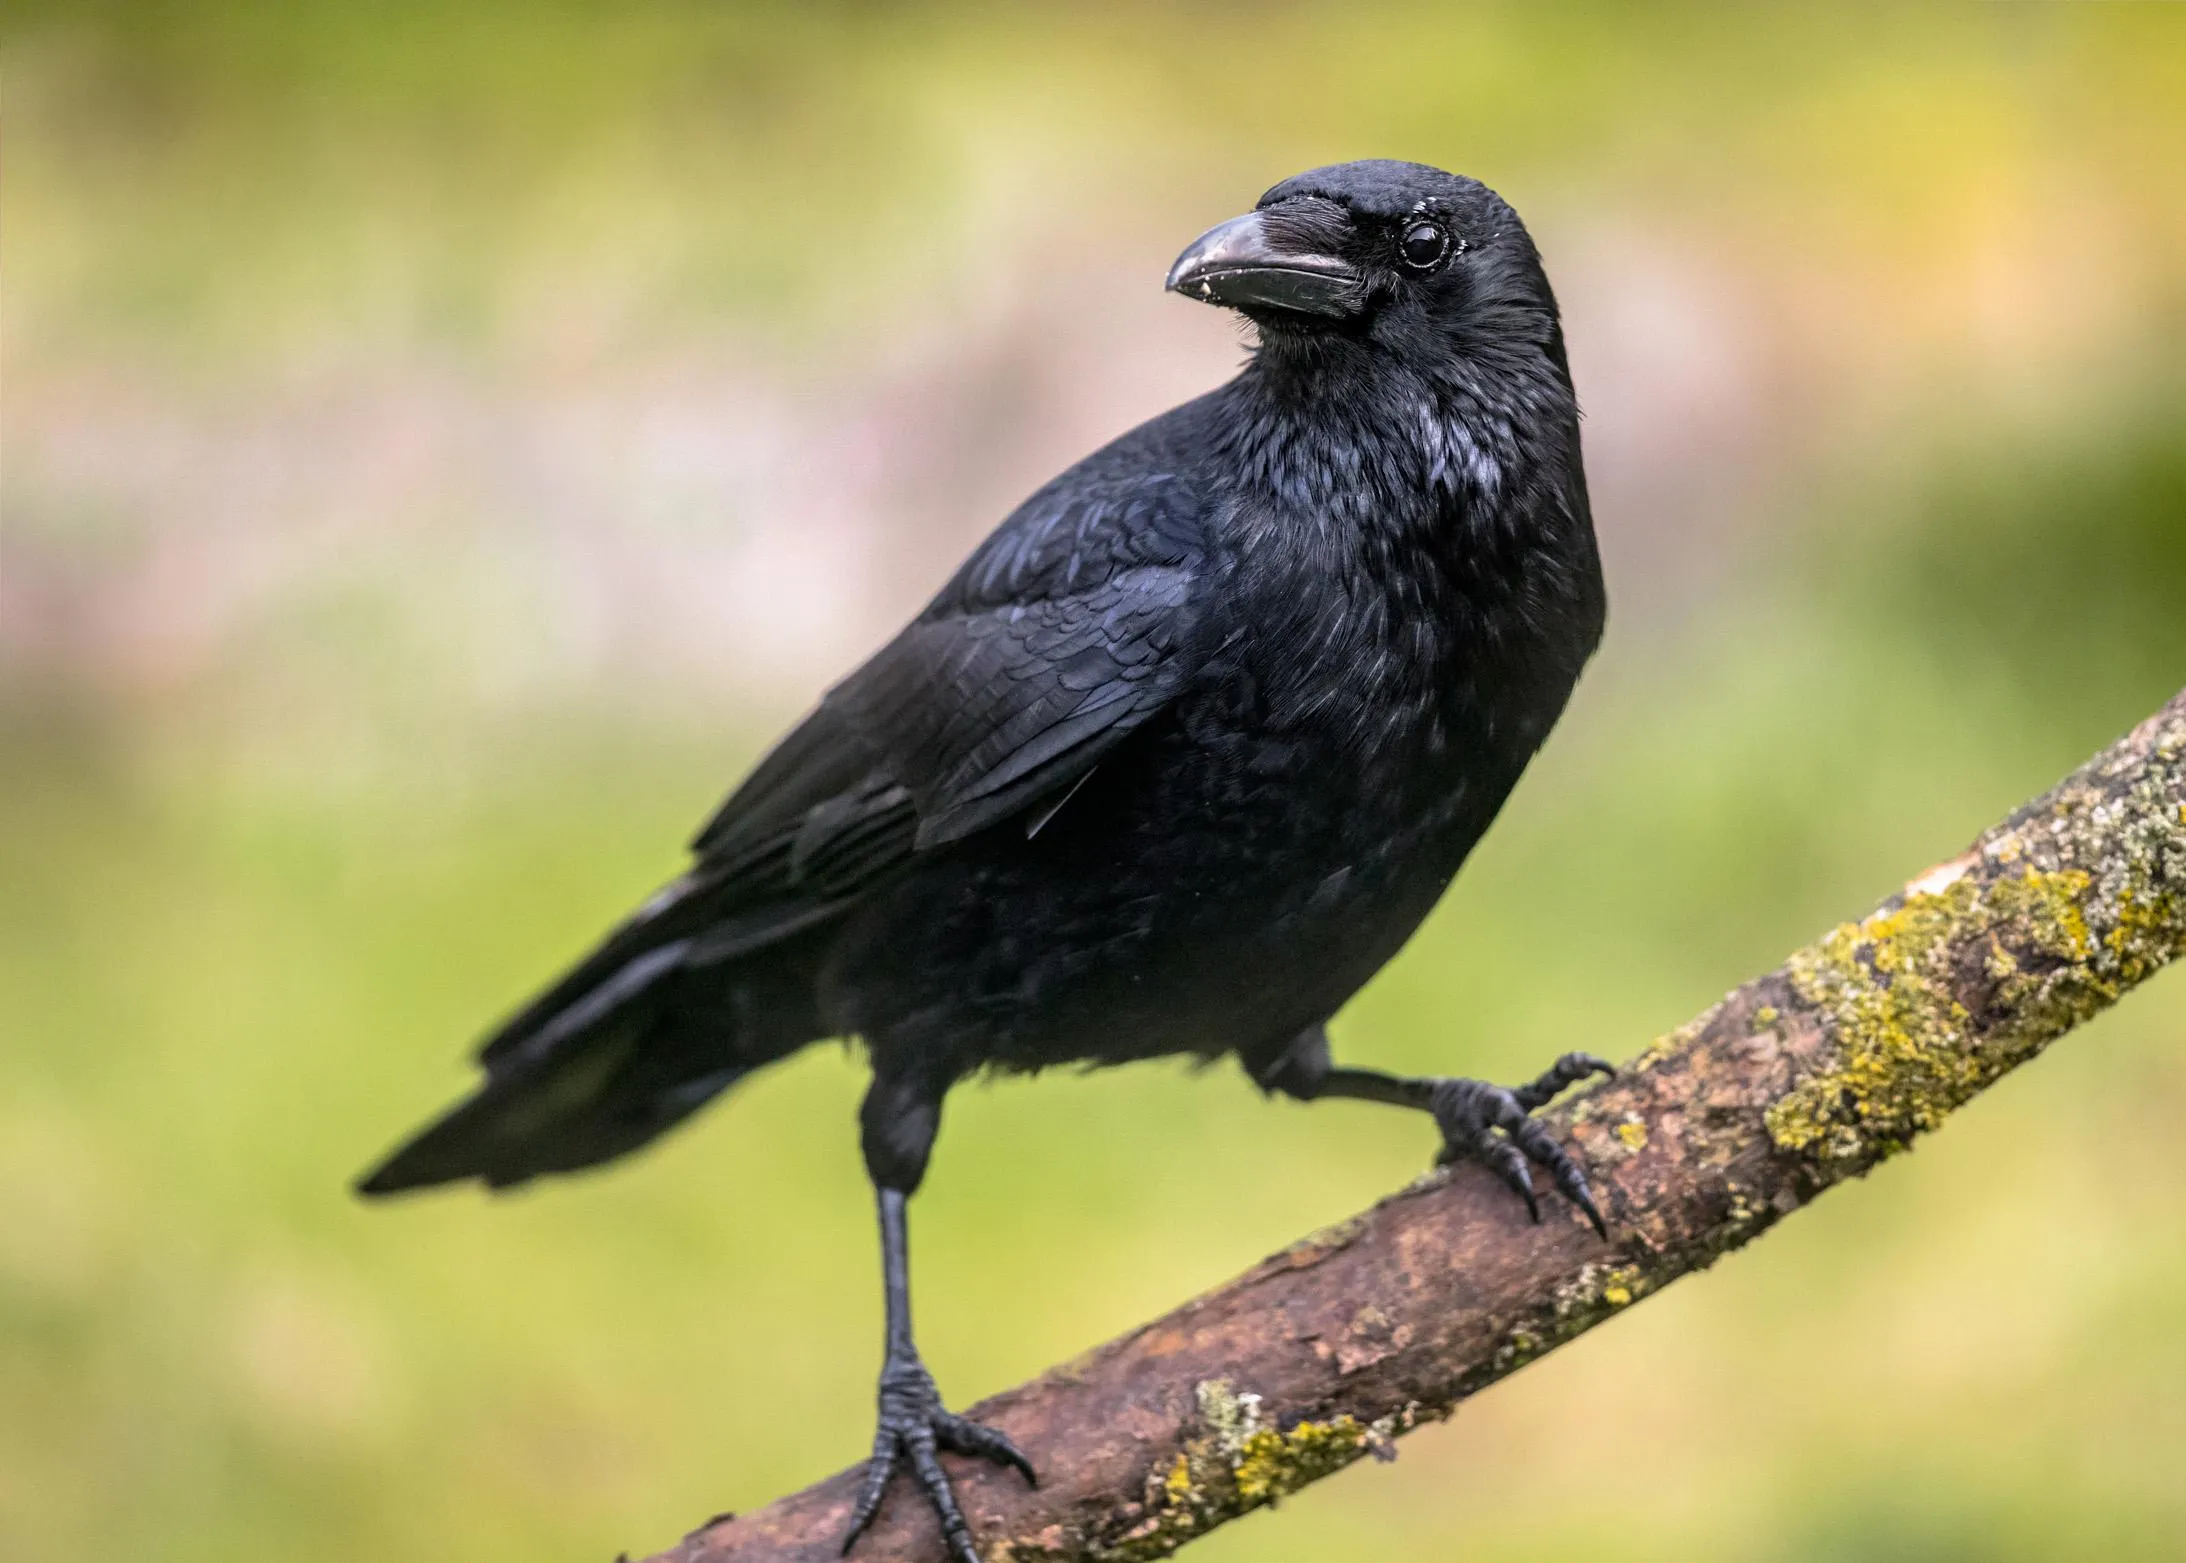 A lone Carrion Crow perched on a mossy branch.